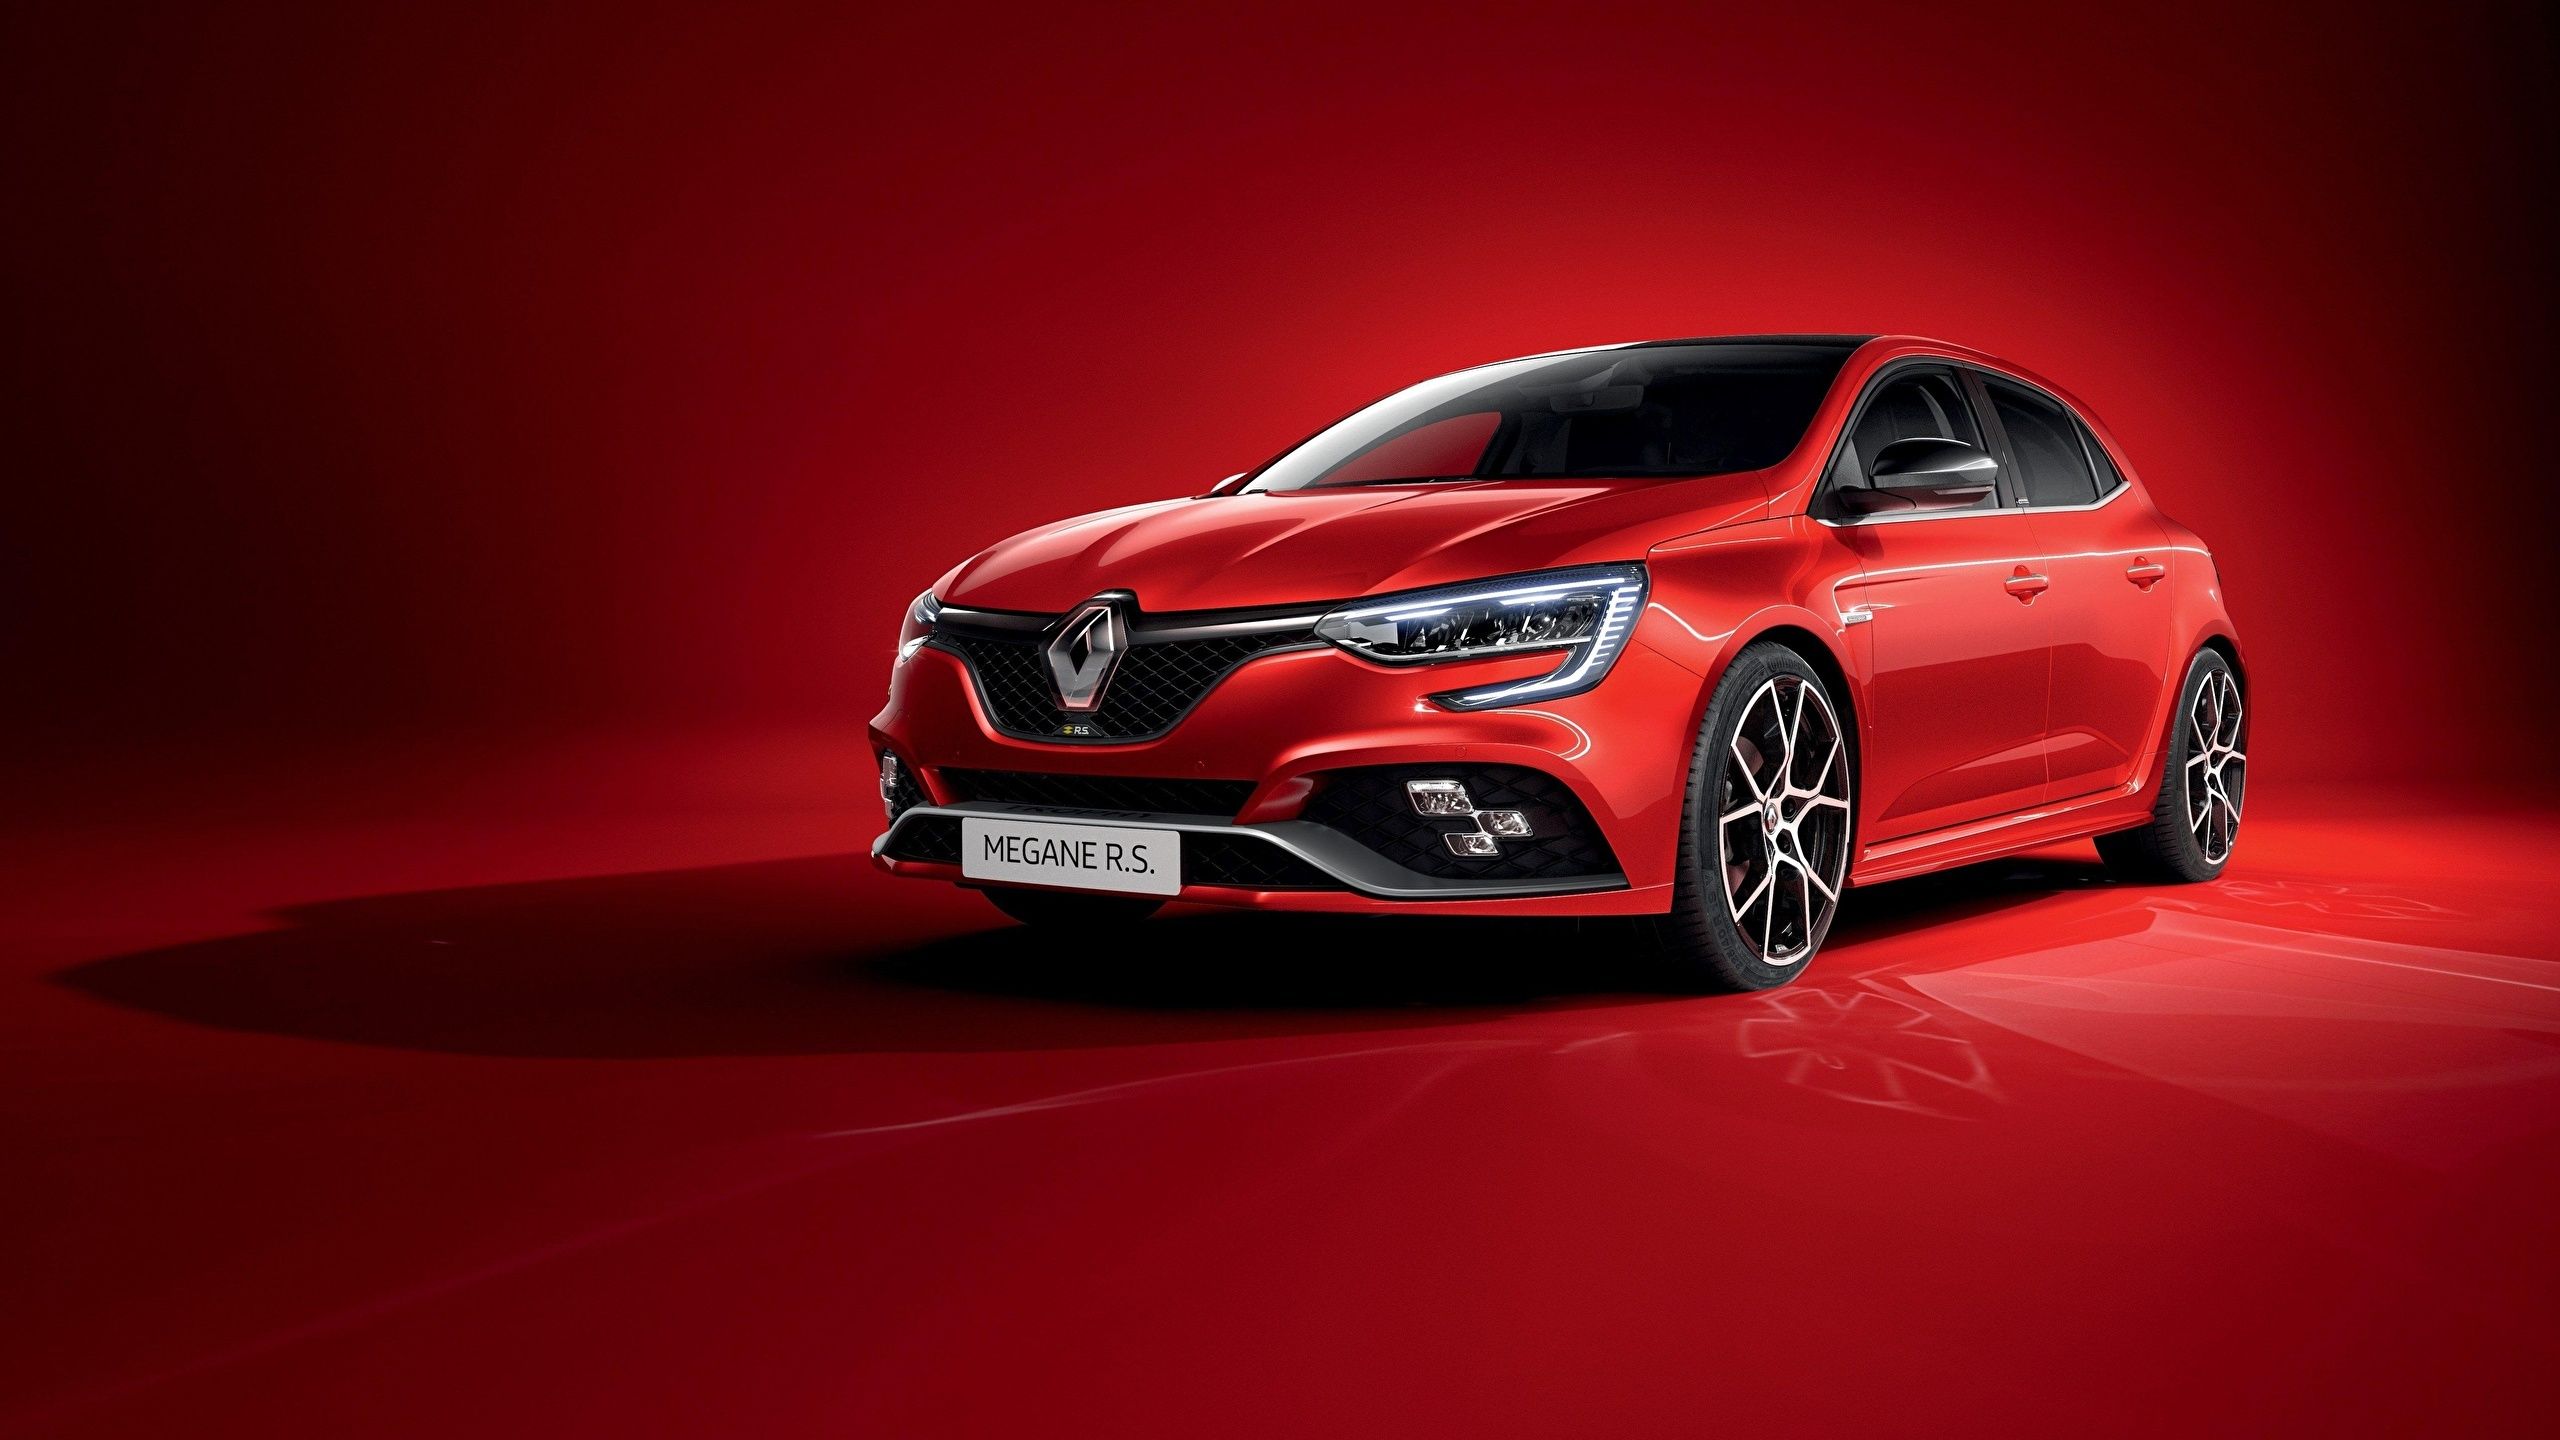 Picture Renault Megane, R.S., Trophy, 2020 Red auto 2560x1440